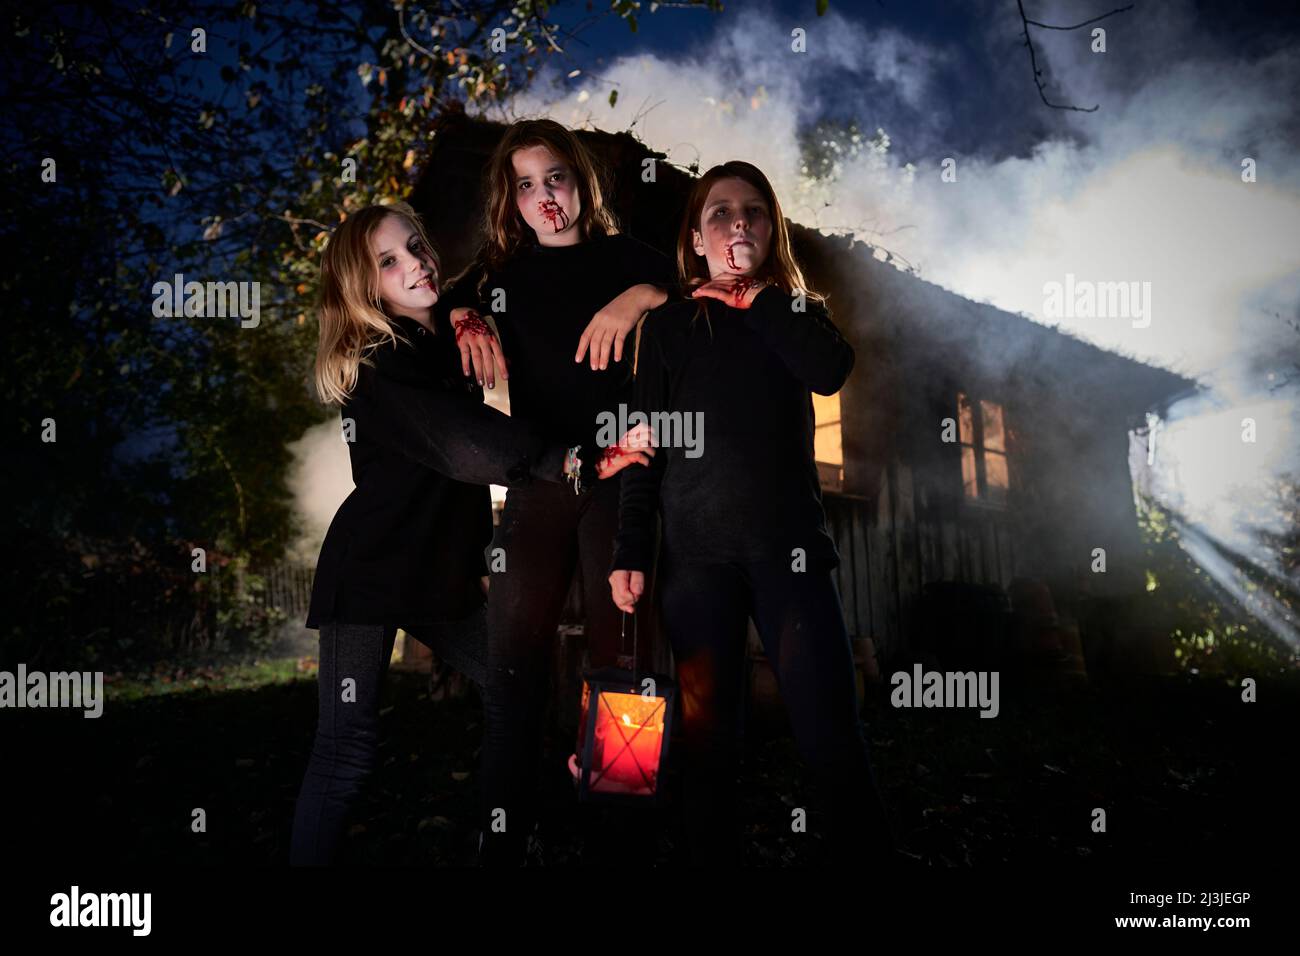 3 young girls with Halloween costumes in front of hut, in fog Stock Photo